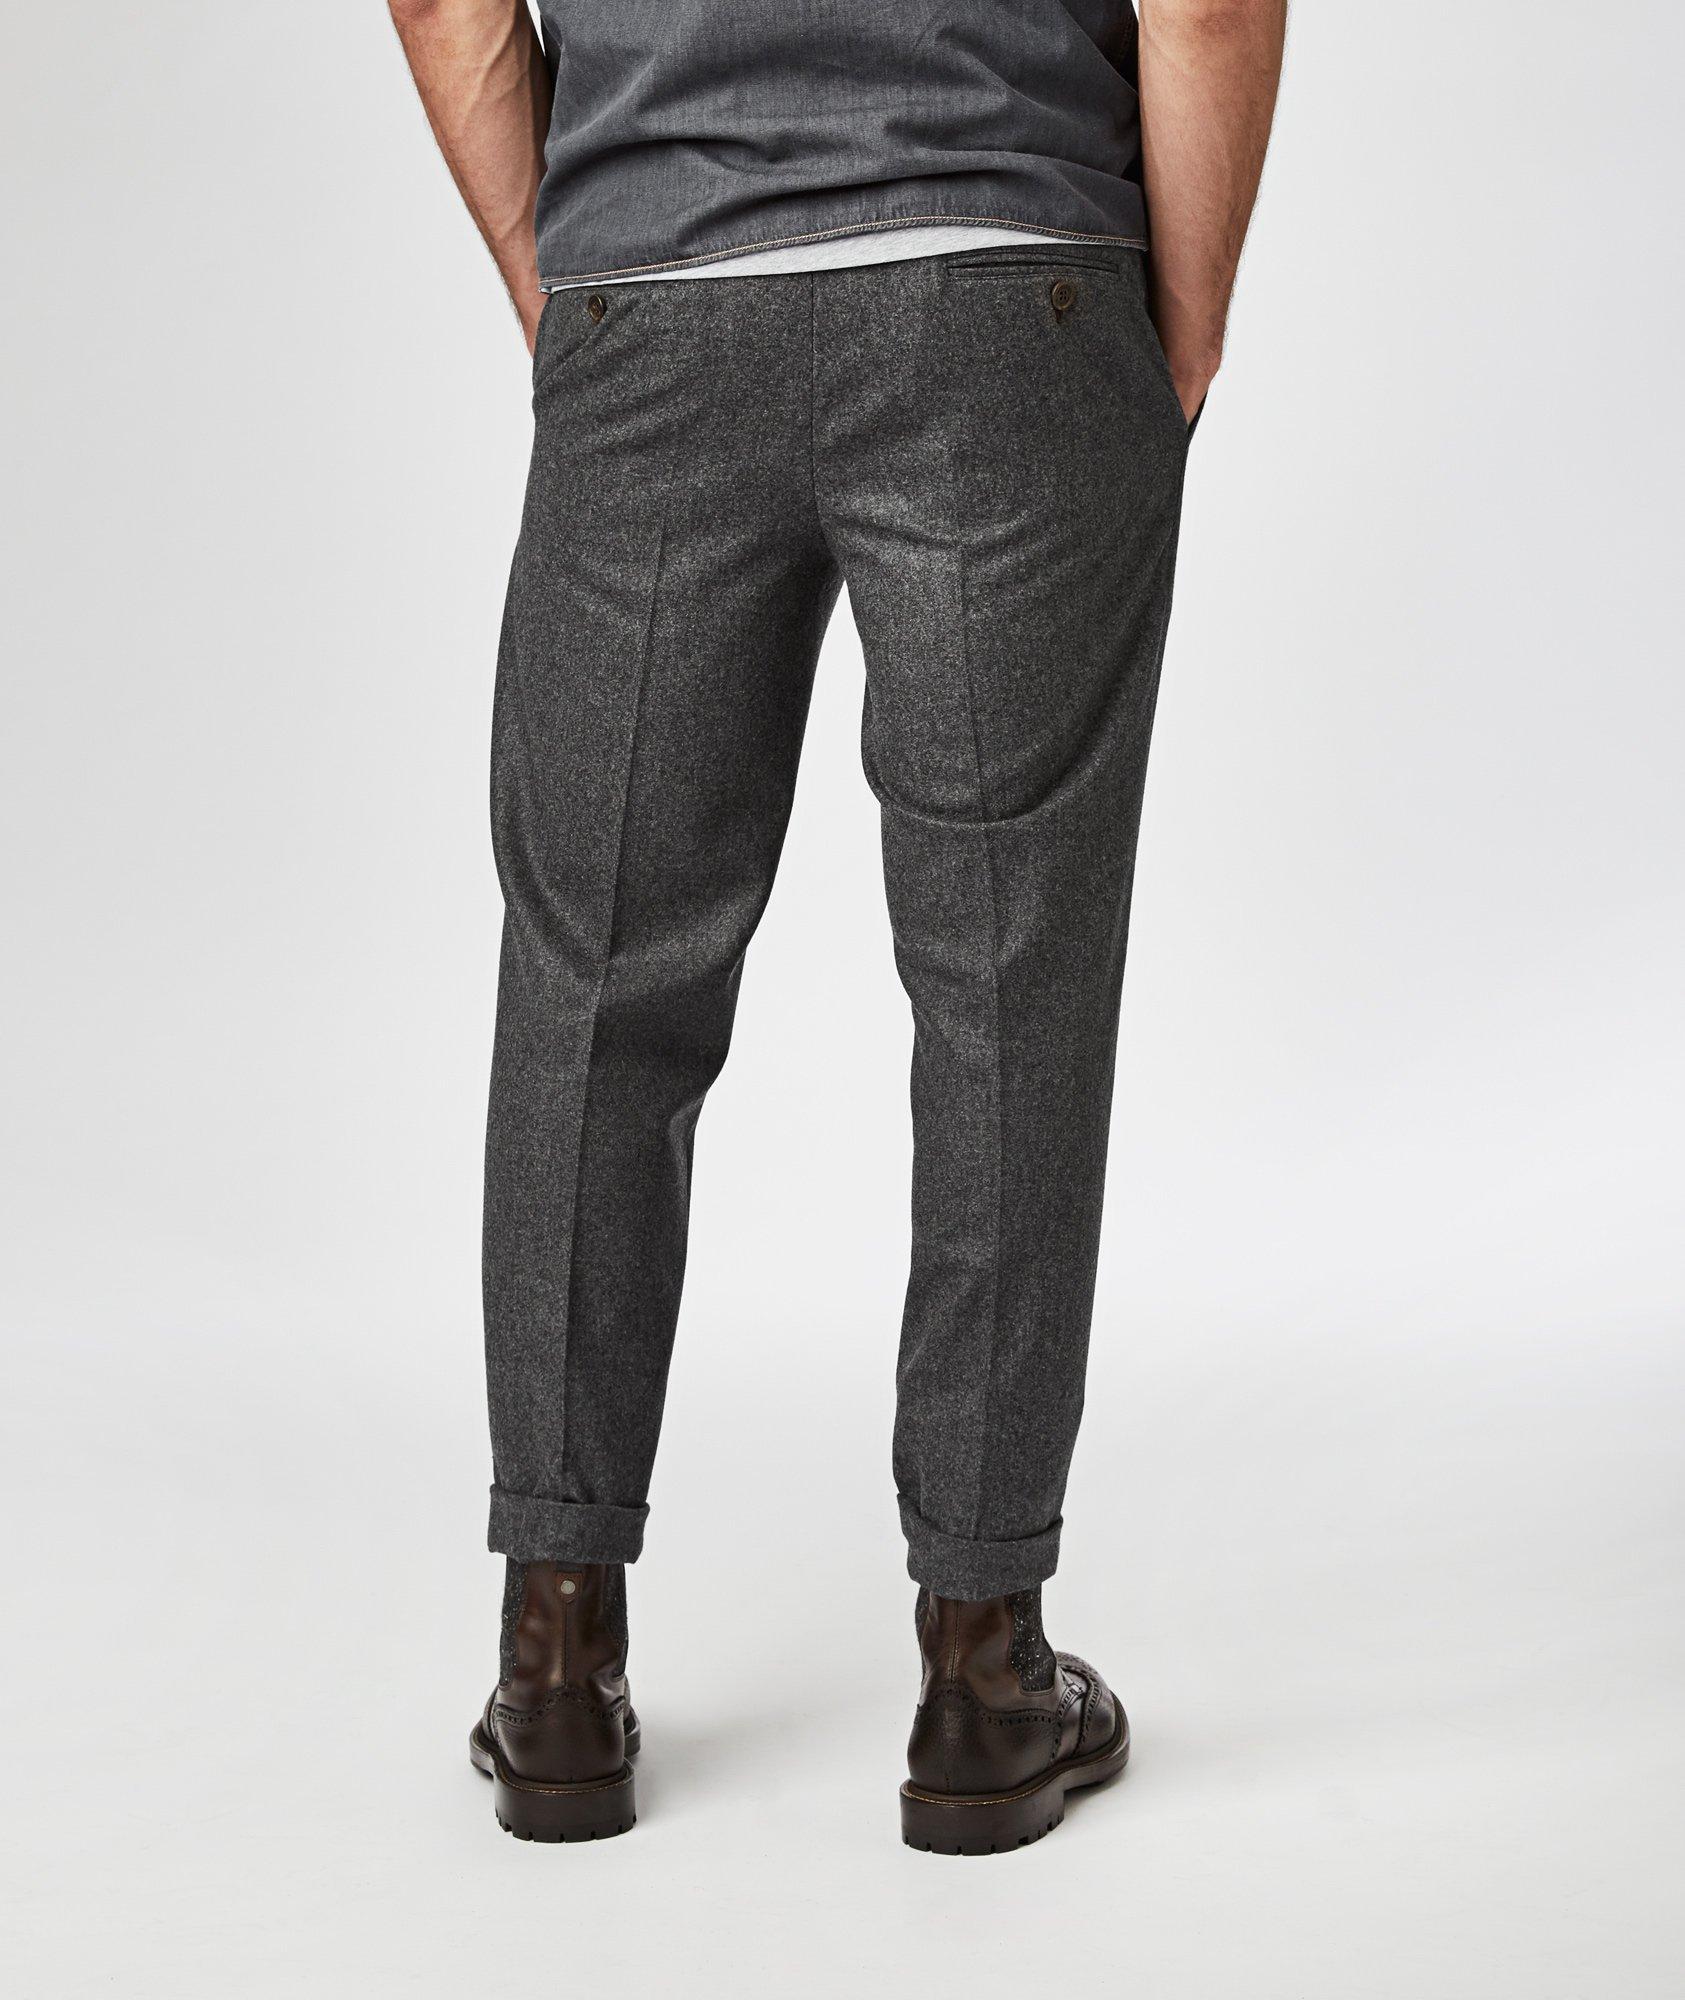 Contemporary Fit Pants image 1